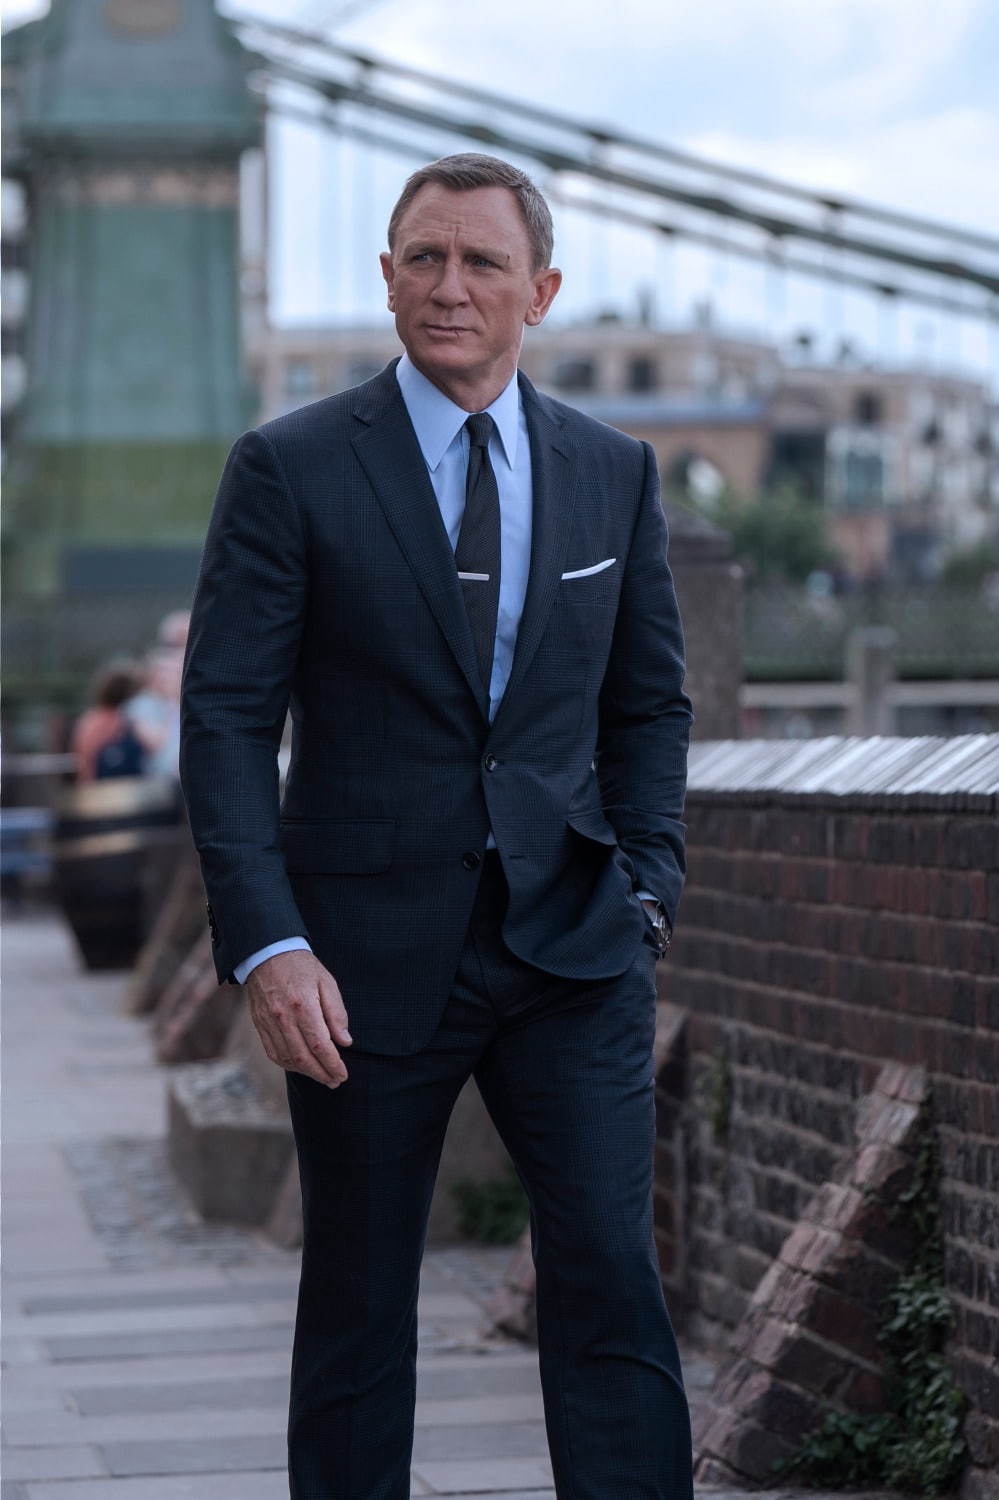 James Bond (Daniel Craig) in NO TIME TO DIE, an EON Productionsand Metro Goldwyn Mayer Studios film
Credit: Nicola Dove© 2020DANJAQ, LLC AND MGM.ALL RIGHTS RESERVED.